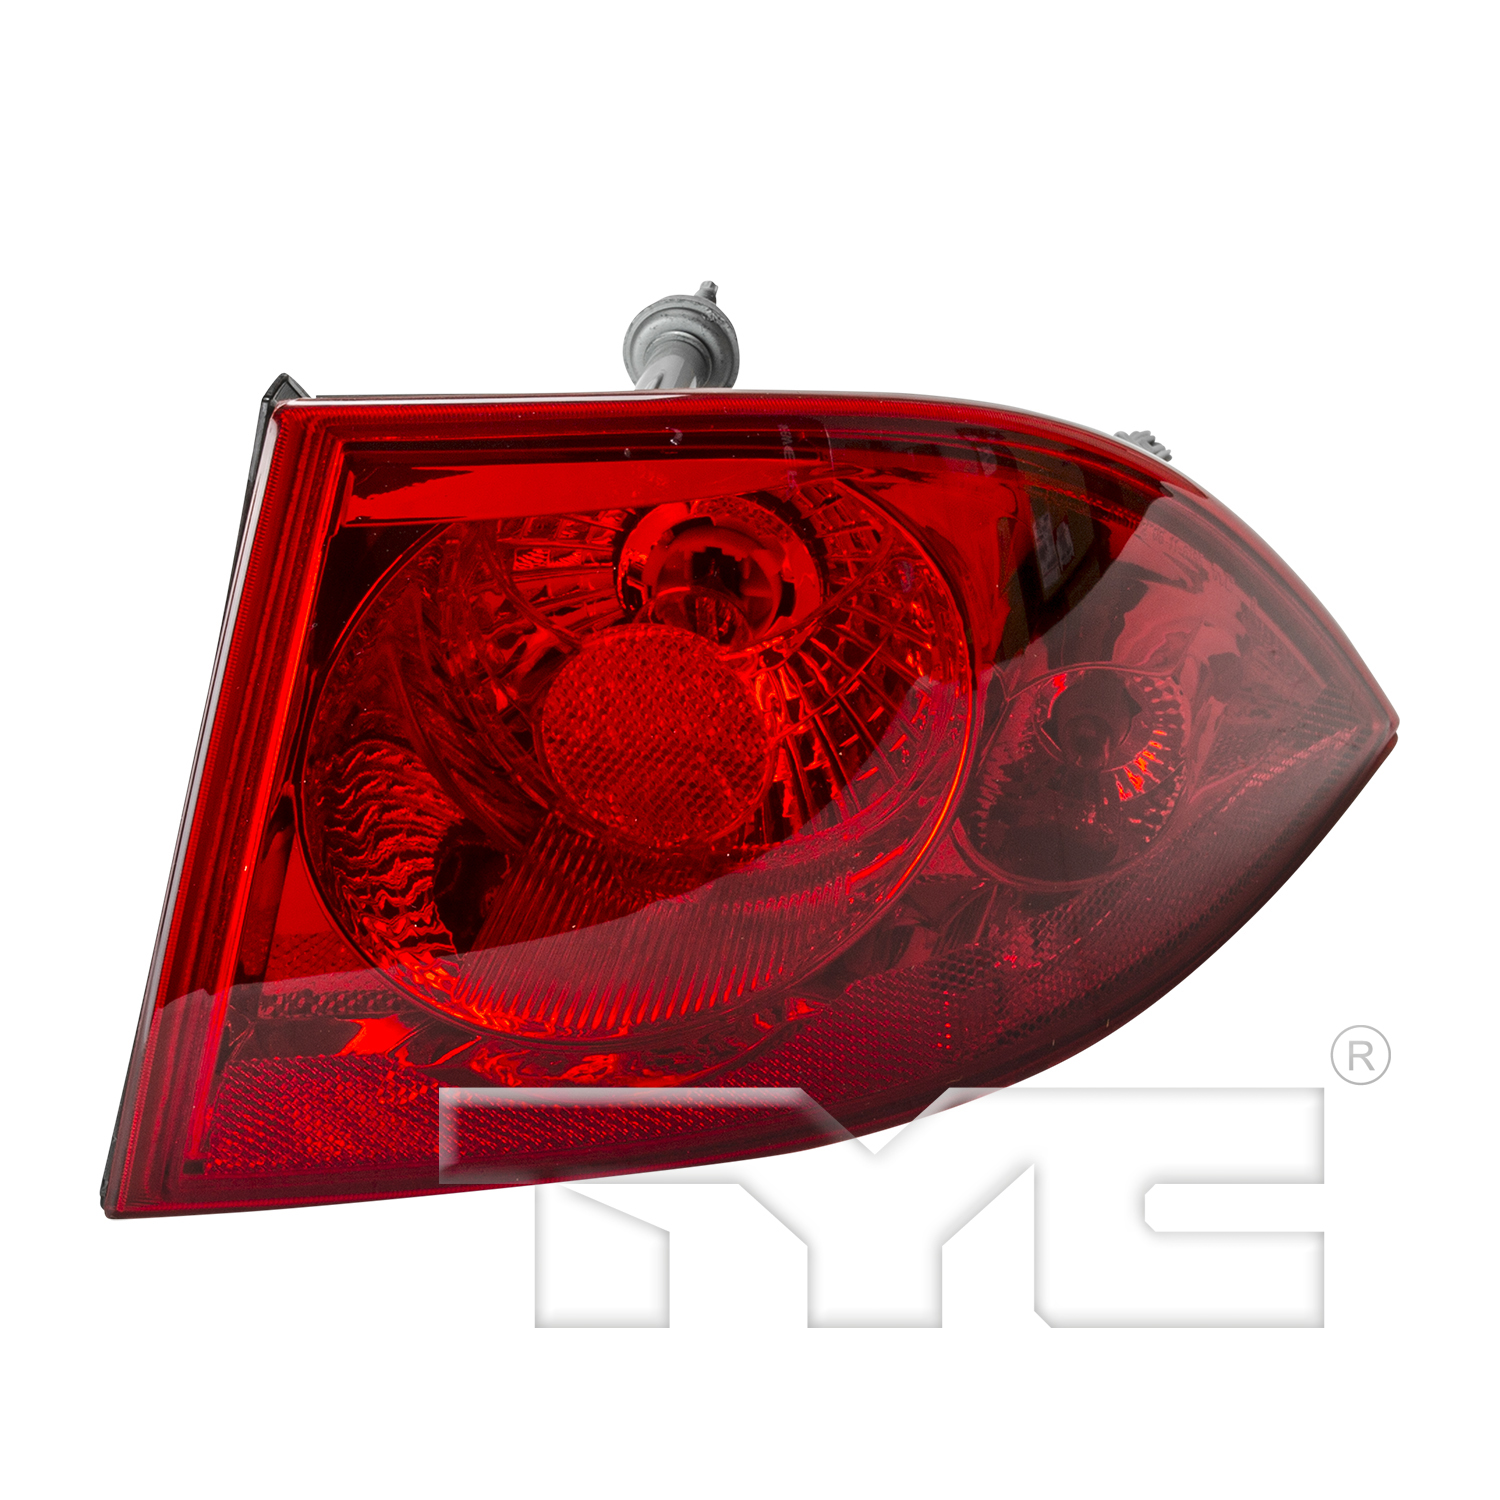 Aftermarket TAILLIGHTS for BUICK - LUCERNE, LUCERNE,06-11,RT Taillamp lens/housing